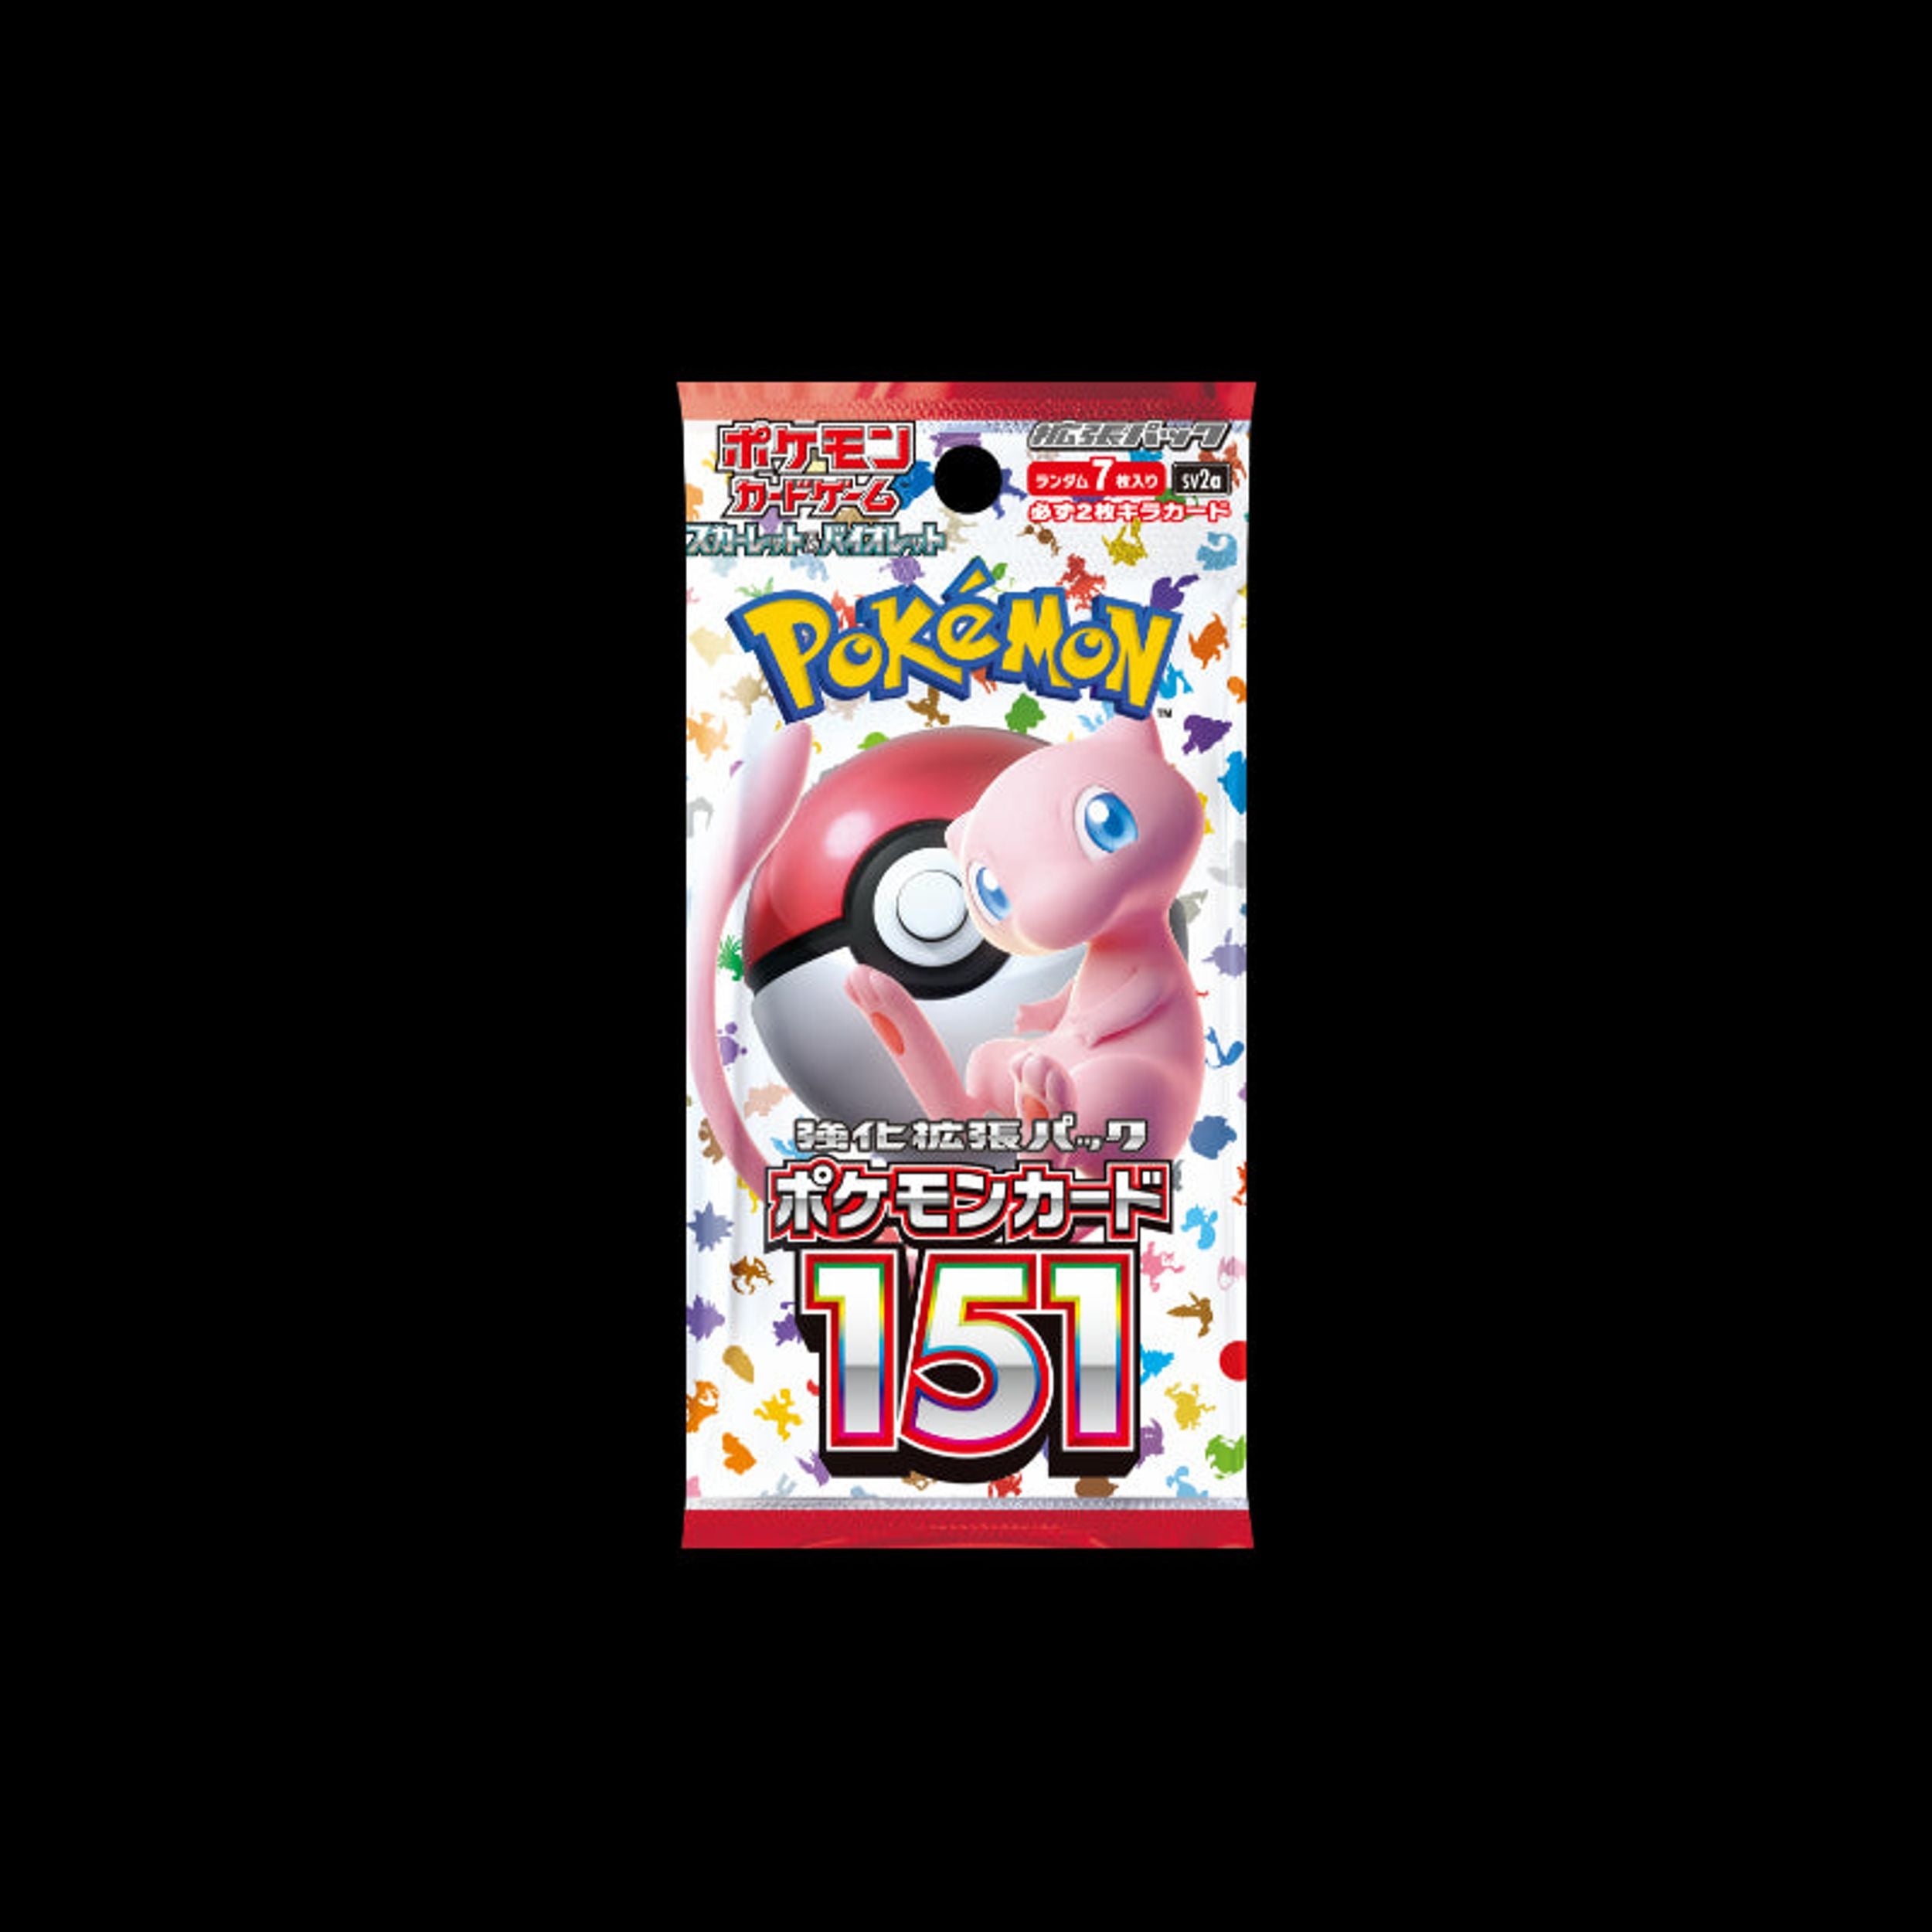 The Pokémon 151 Booster Bundle: A Hands-on Review